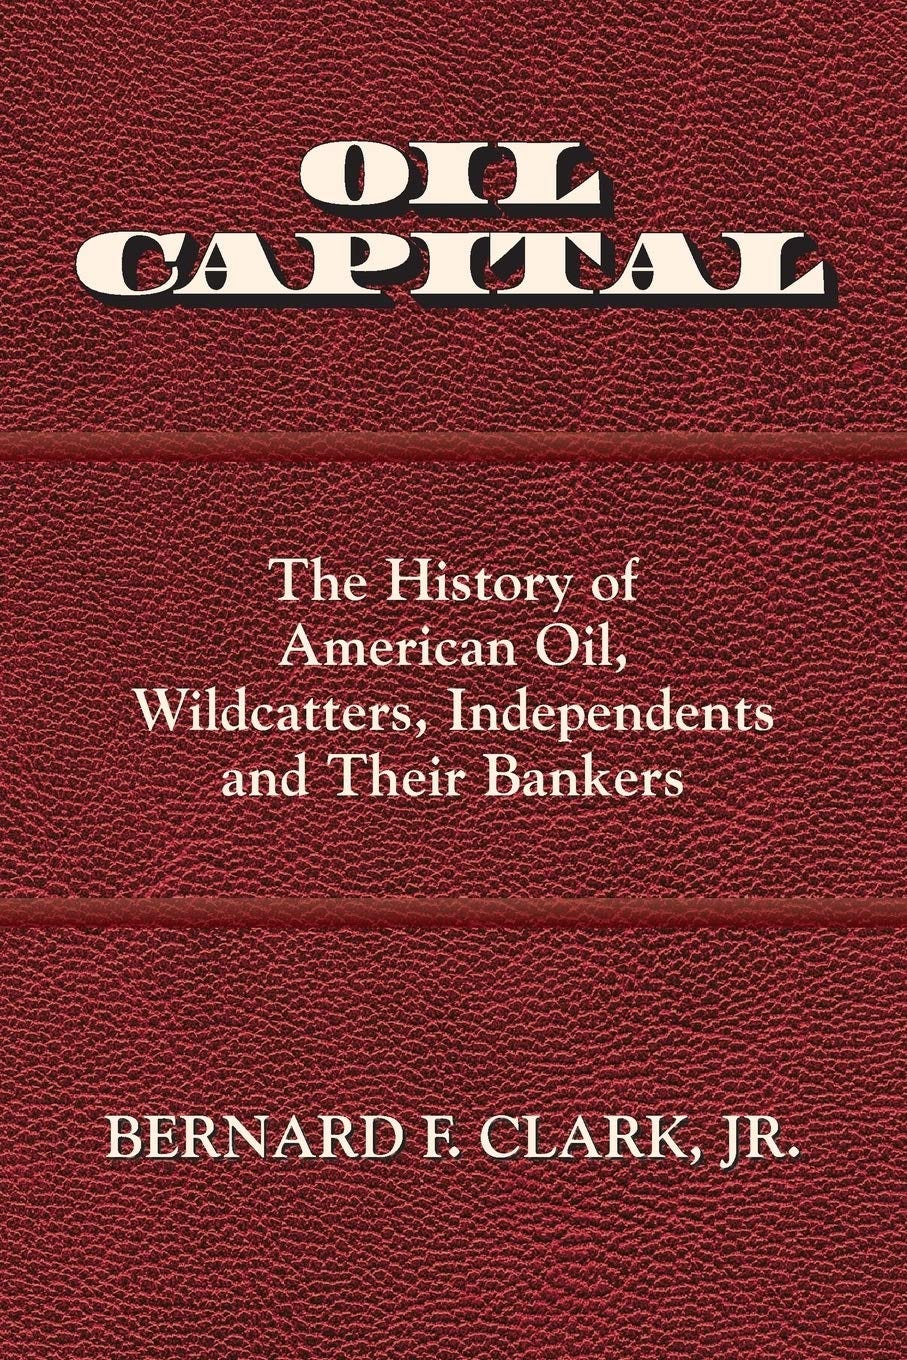 Oil Capital: The History of American Oil, Wildcatters, Independents and  Their Bankers: Clark, Bernard F: 9780692817322: Amazon.com: Books